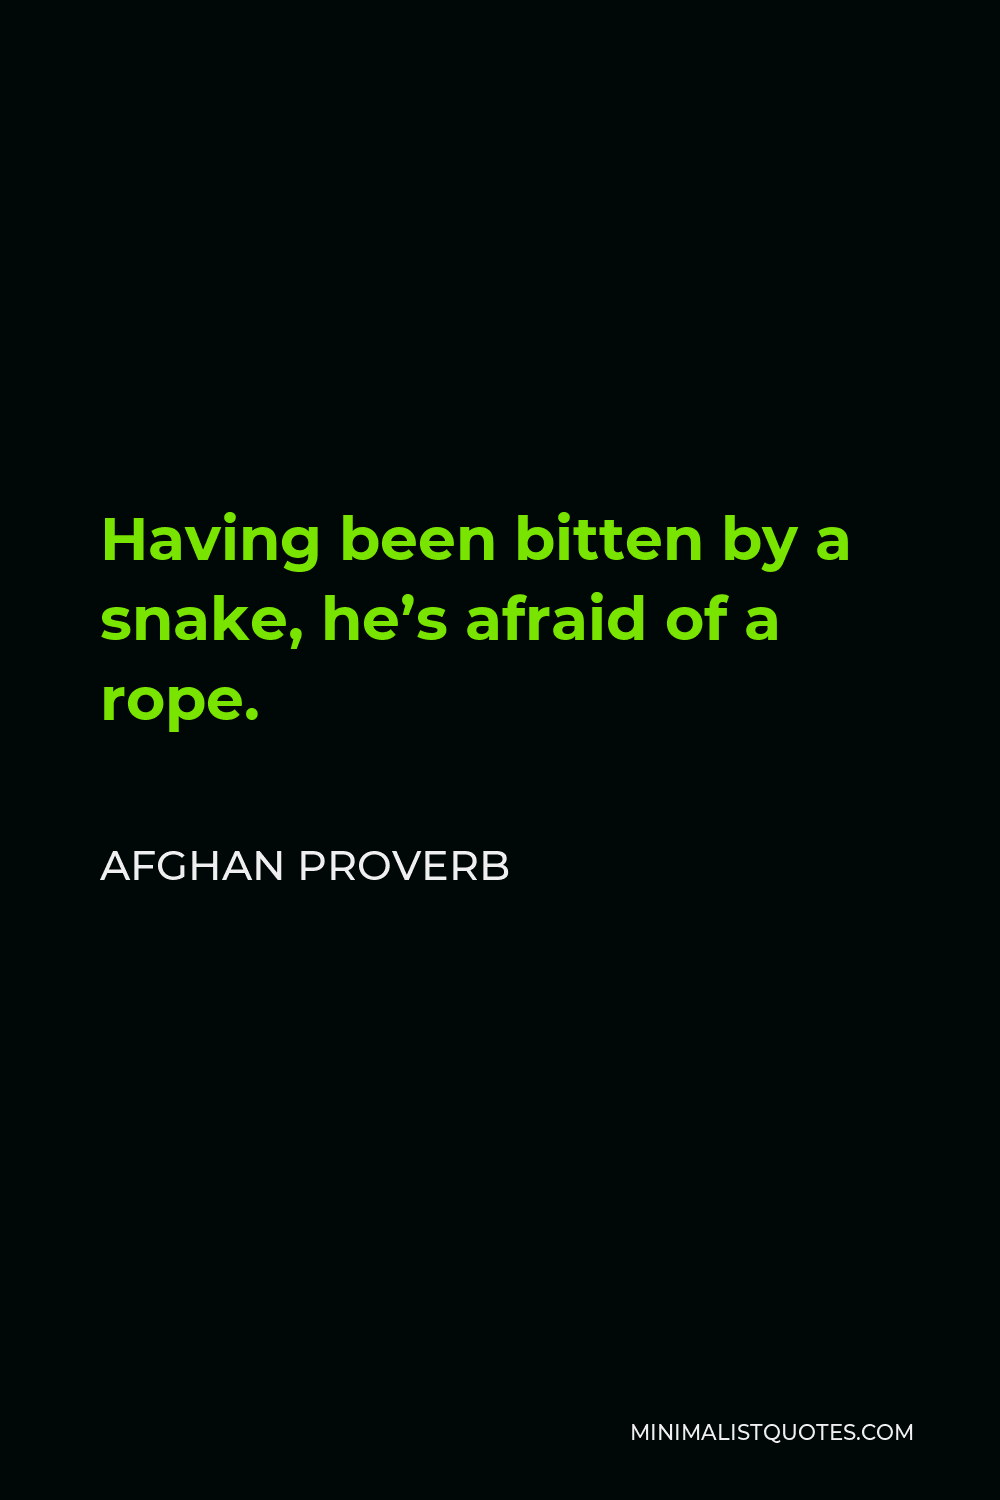 Afghan Proverb Quote - Having been bitten by a snake, he’s afraid of a rope.